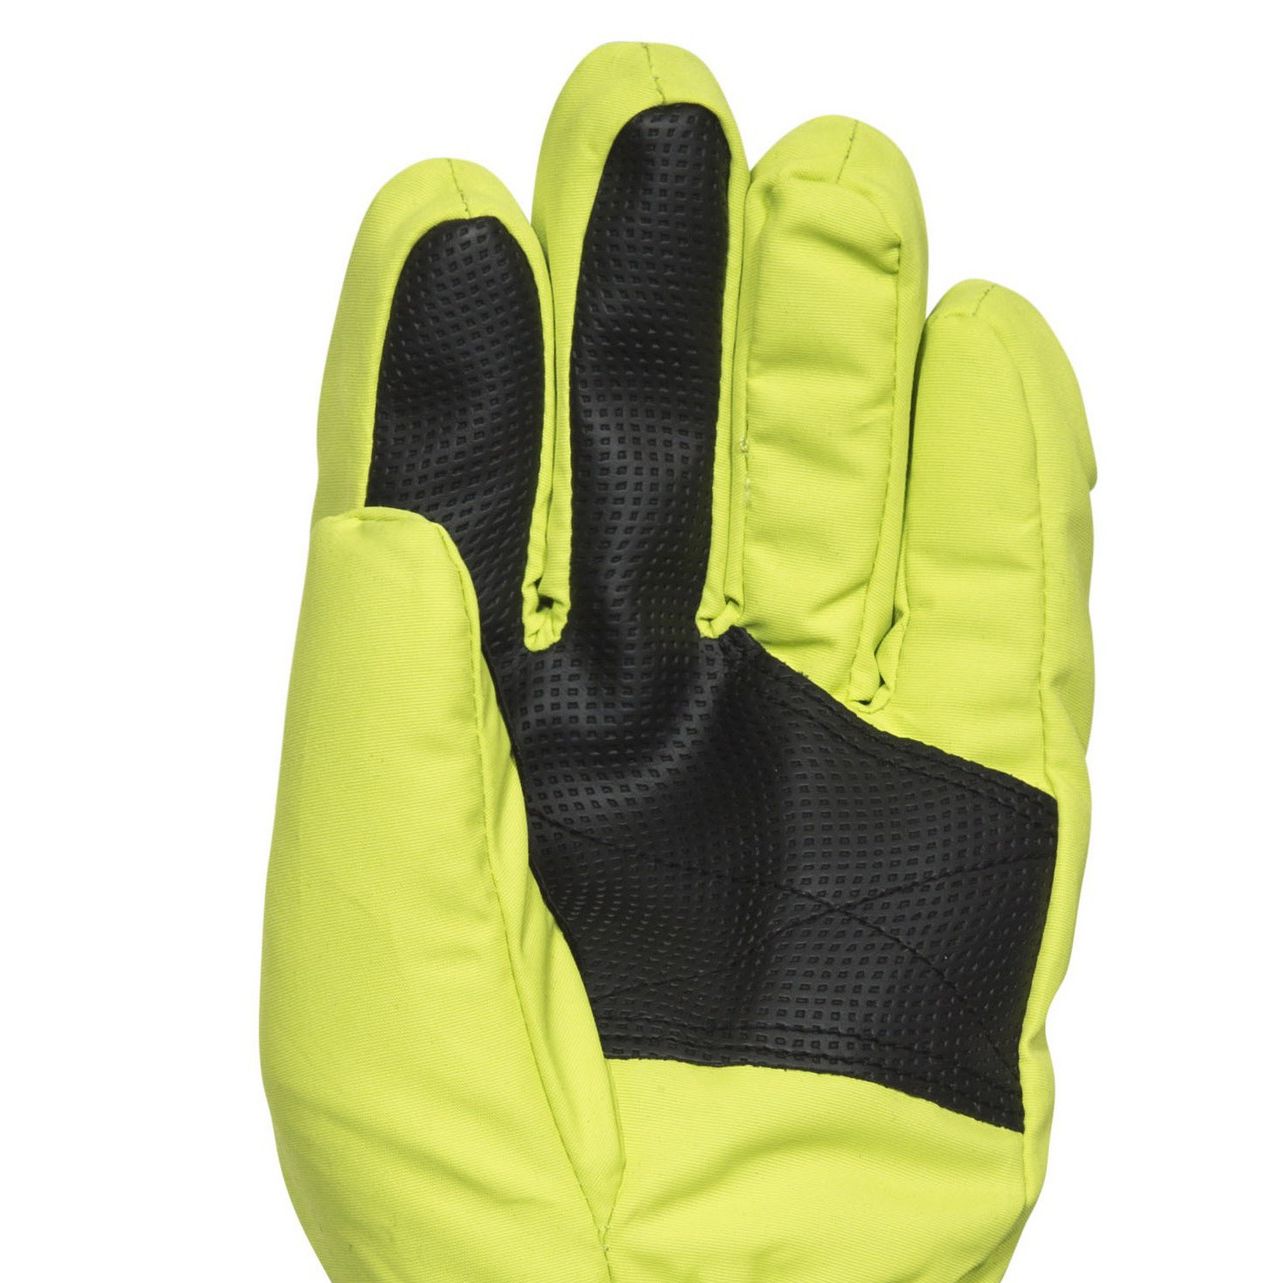 Unisex glove. Lightly padded. Adjustable wrist strap. Knitted glove. Plastic clip. Water resistant. Shell: 100% Polyamide, Lining: 100% Polyester, Padding: 100% Polyester.